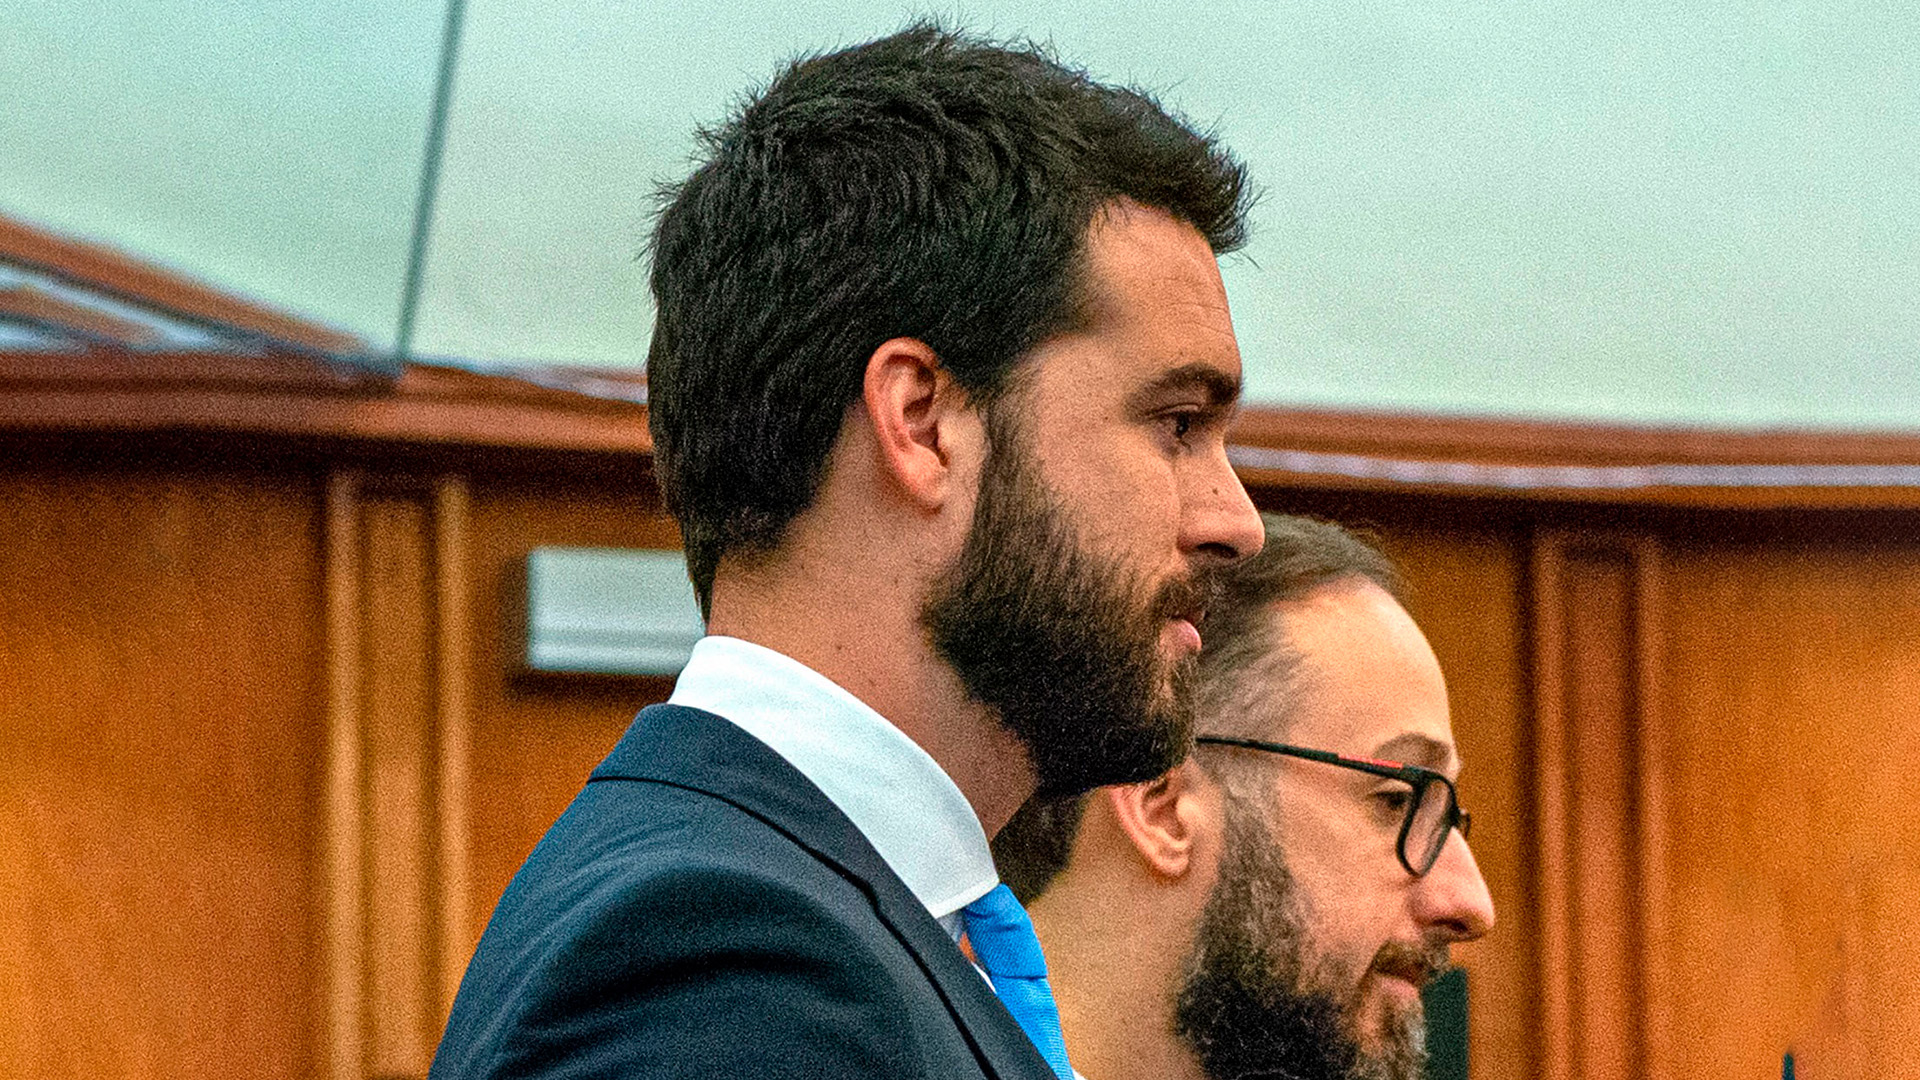 Pablo Lyle could spend between 9 years and six months to 15 years in prison (Photo: EFE)